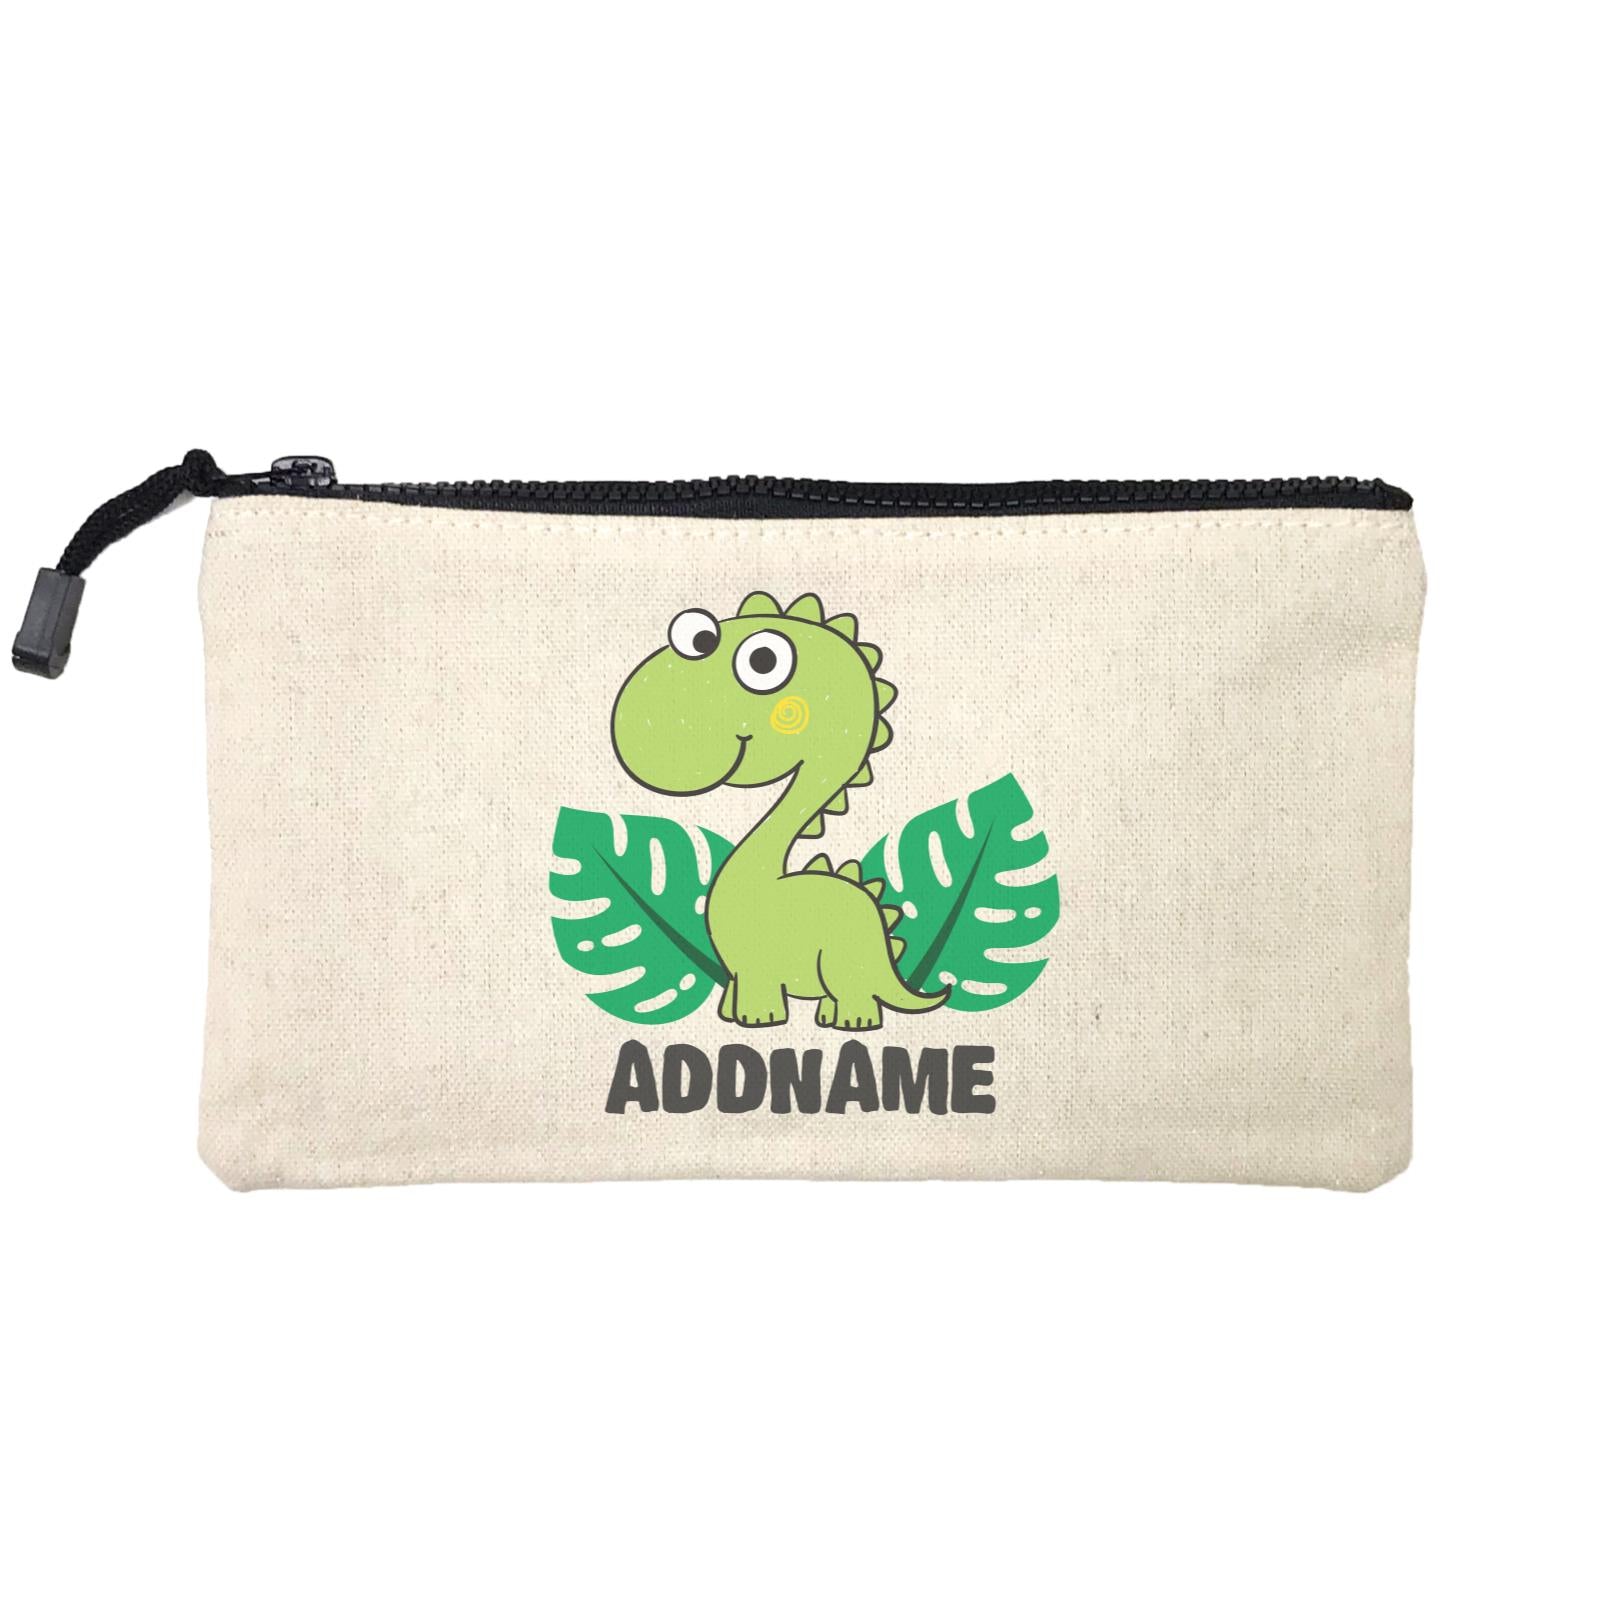 Super Cute Dinosaur With Green Leaves Mini Accessories Stationery Pouch